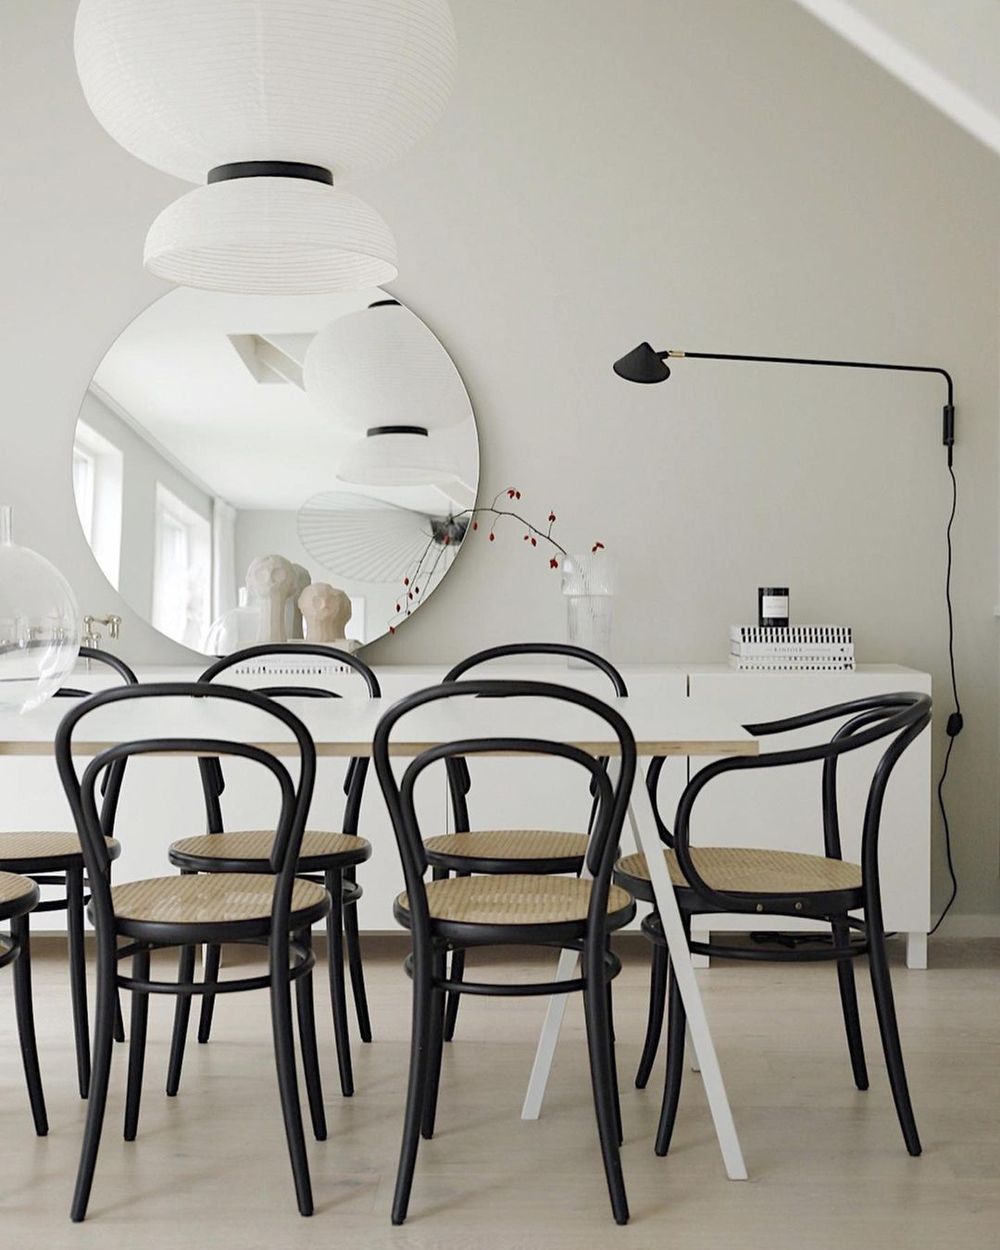 Neutral Dining Room with Black Bentwood Dining Chairs via @emmamelins